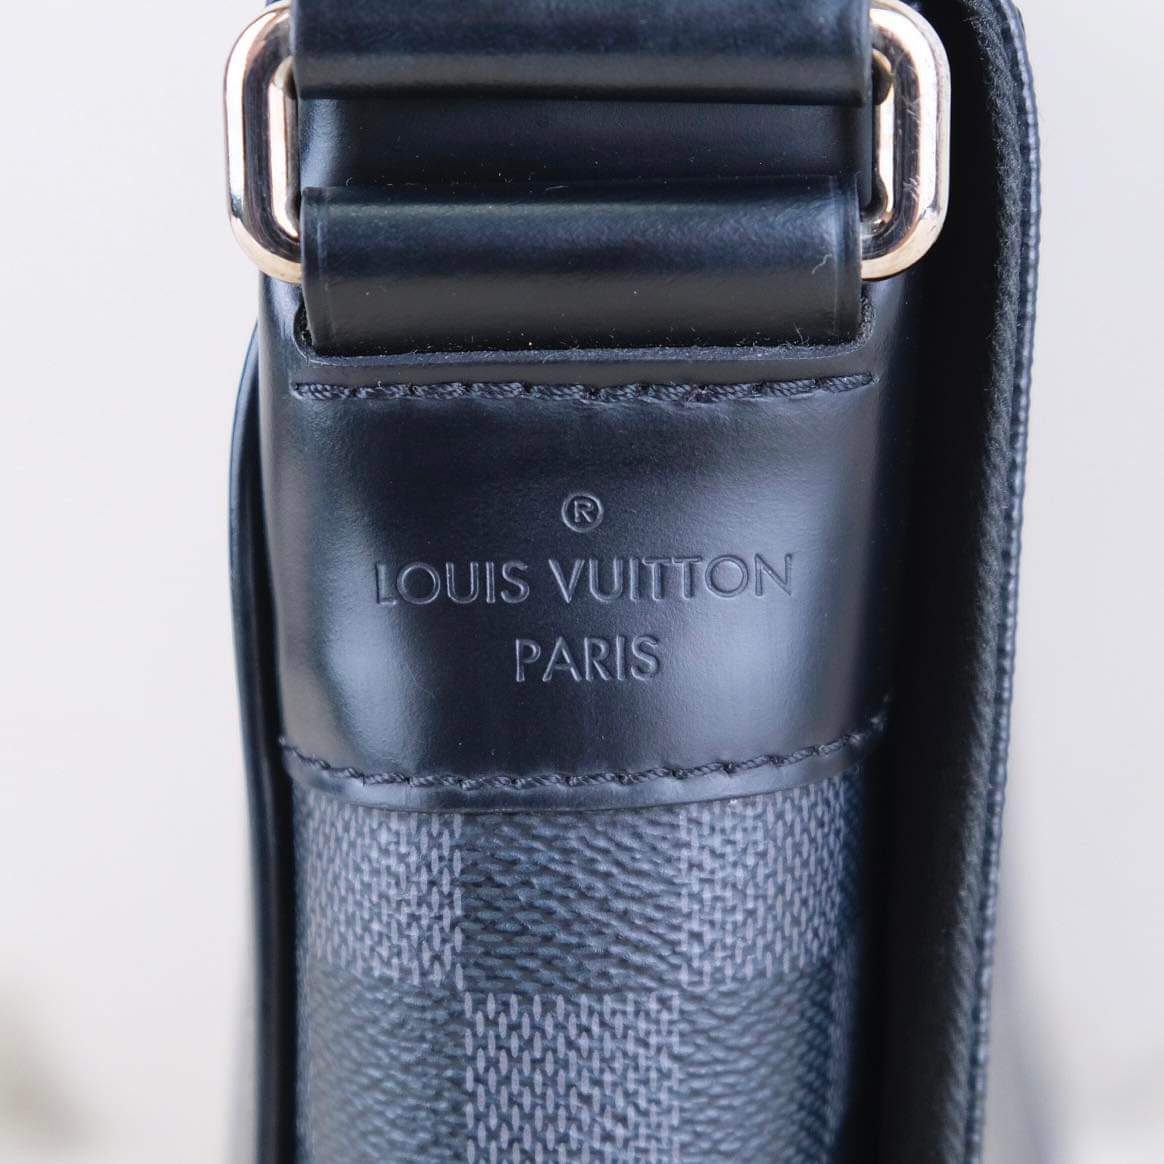 How to protect/clean bandouliere nylon strap? : r/Louisvuitton